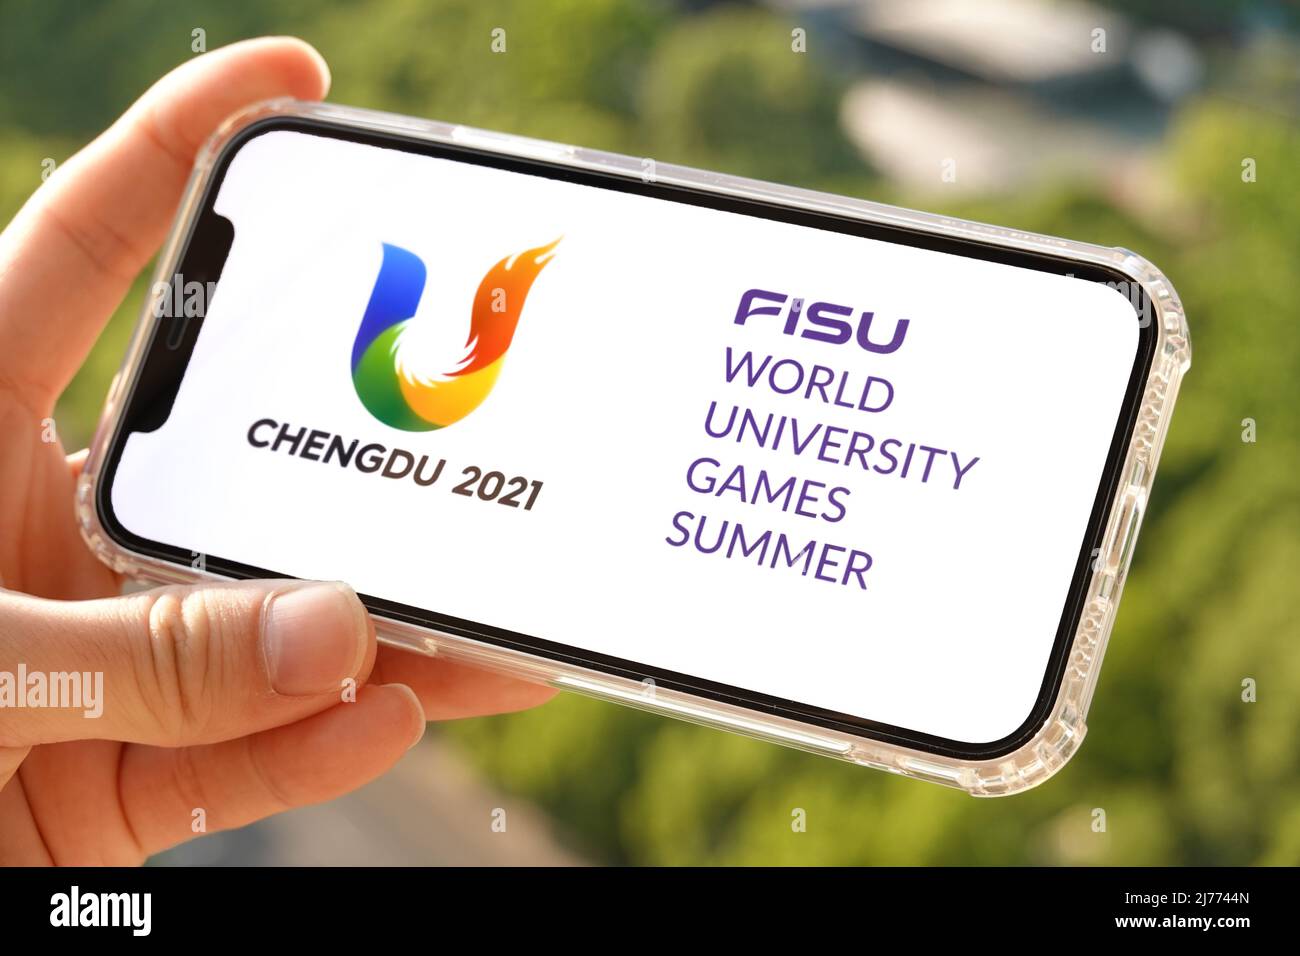 May 6, 2022, China: In this photo illustration, the logo of Chengdu World University Games is displayed on a smartphone screen. The Chengdu 2021 World University Games has been postponed until 2023, the International University Sports Federation (FISU) announced on Friday..The FISU Games had initially been scheduled for the summer of 2021 but were rescheduled for June this year following the postponement of the Olympic Games in Tokyo 2020. (Credit Image: © Sheldon Cooper/SOPA Images via ZUMA Press Wire) Stock Photo